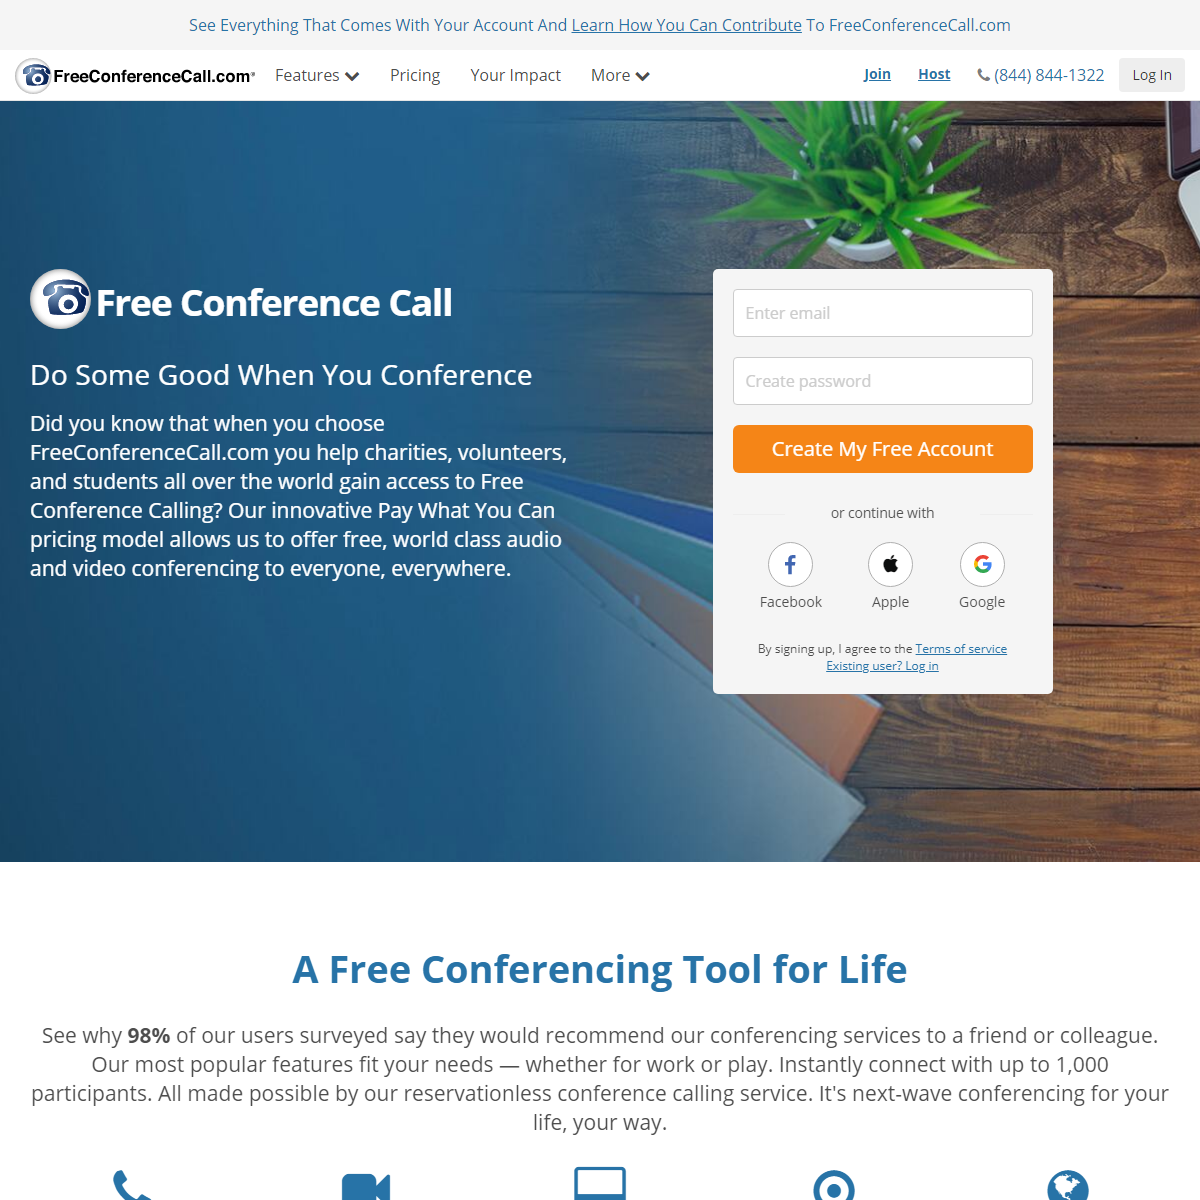 A complete backup of https://www.freeconferencecall.com/